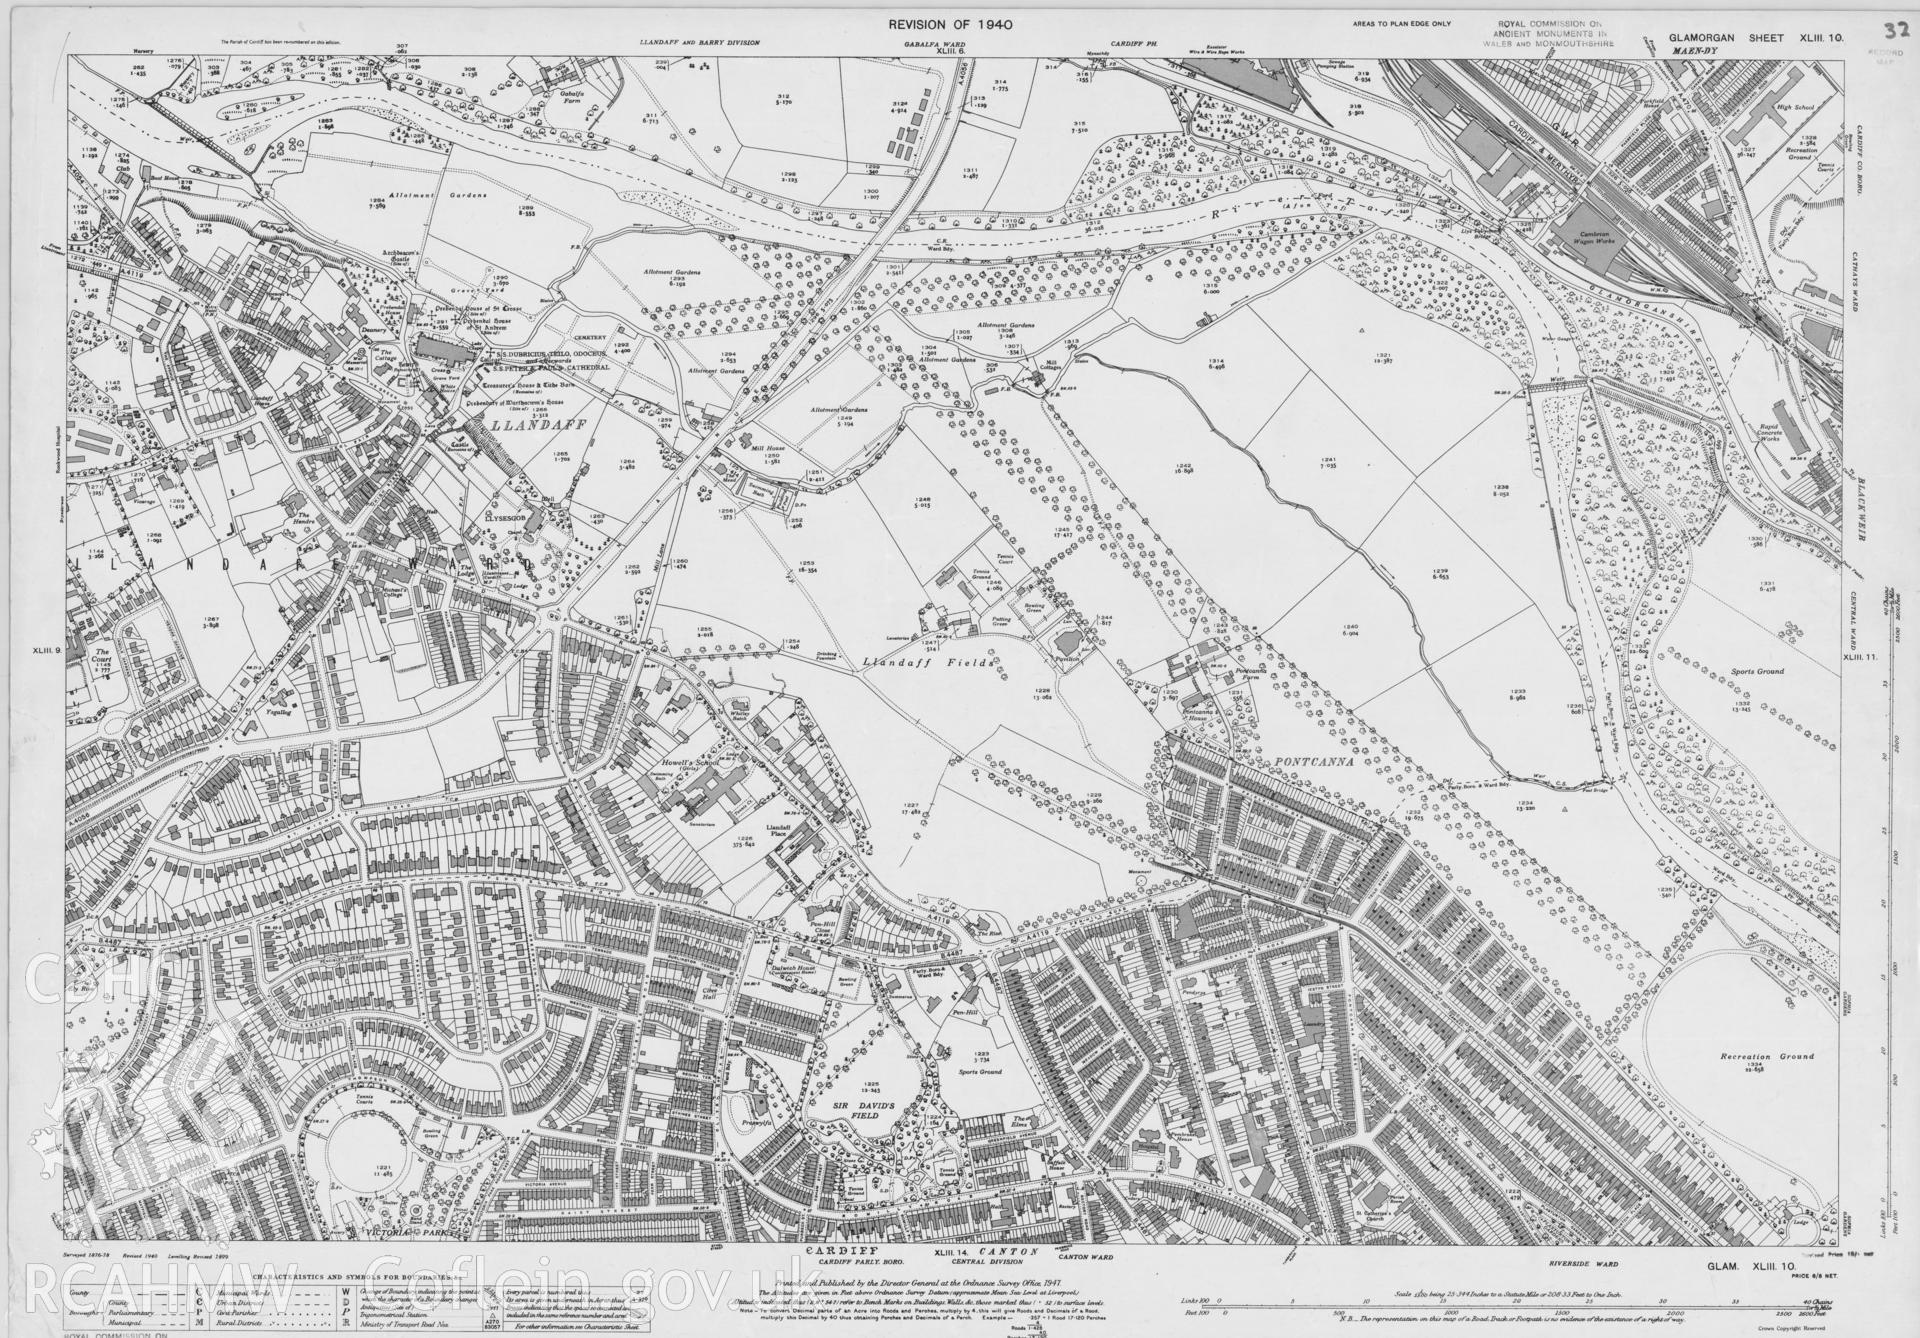 Digitized copy of Ordnance Survey 25 inch 1940 revision map of the Pontcanna district of Cardiff.